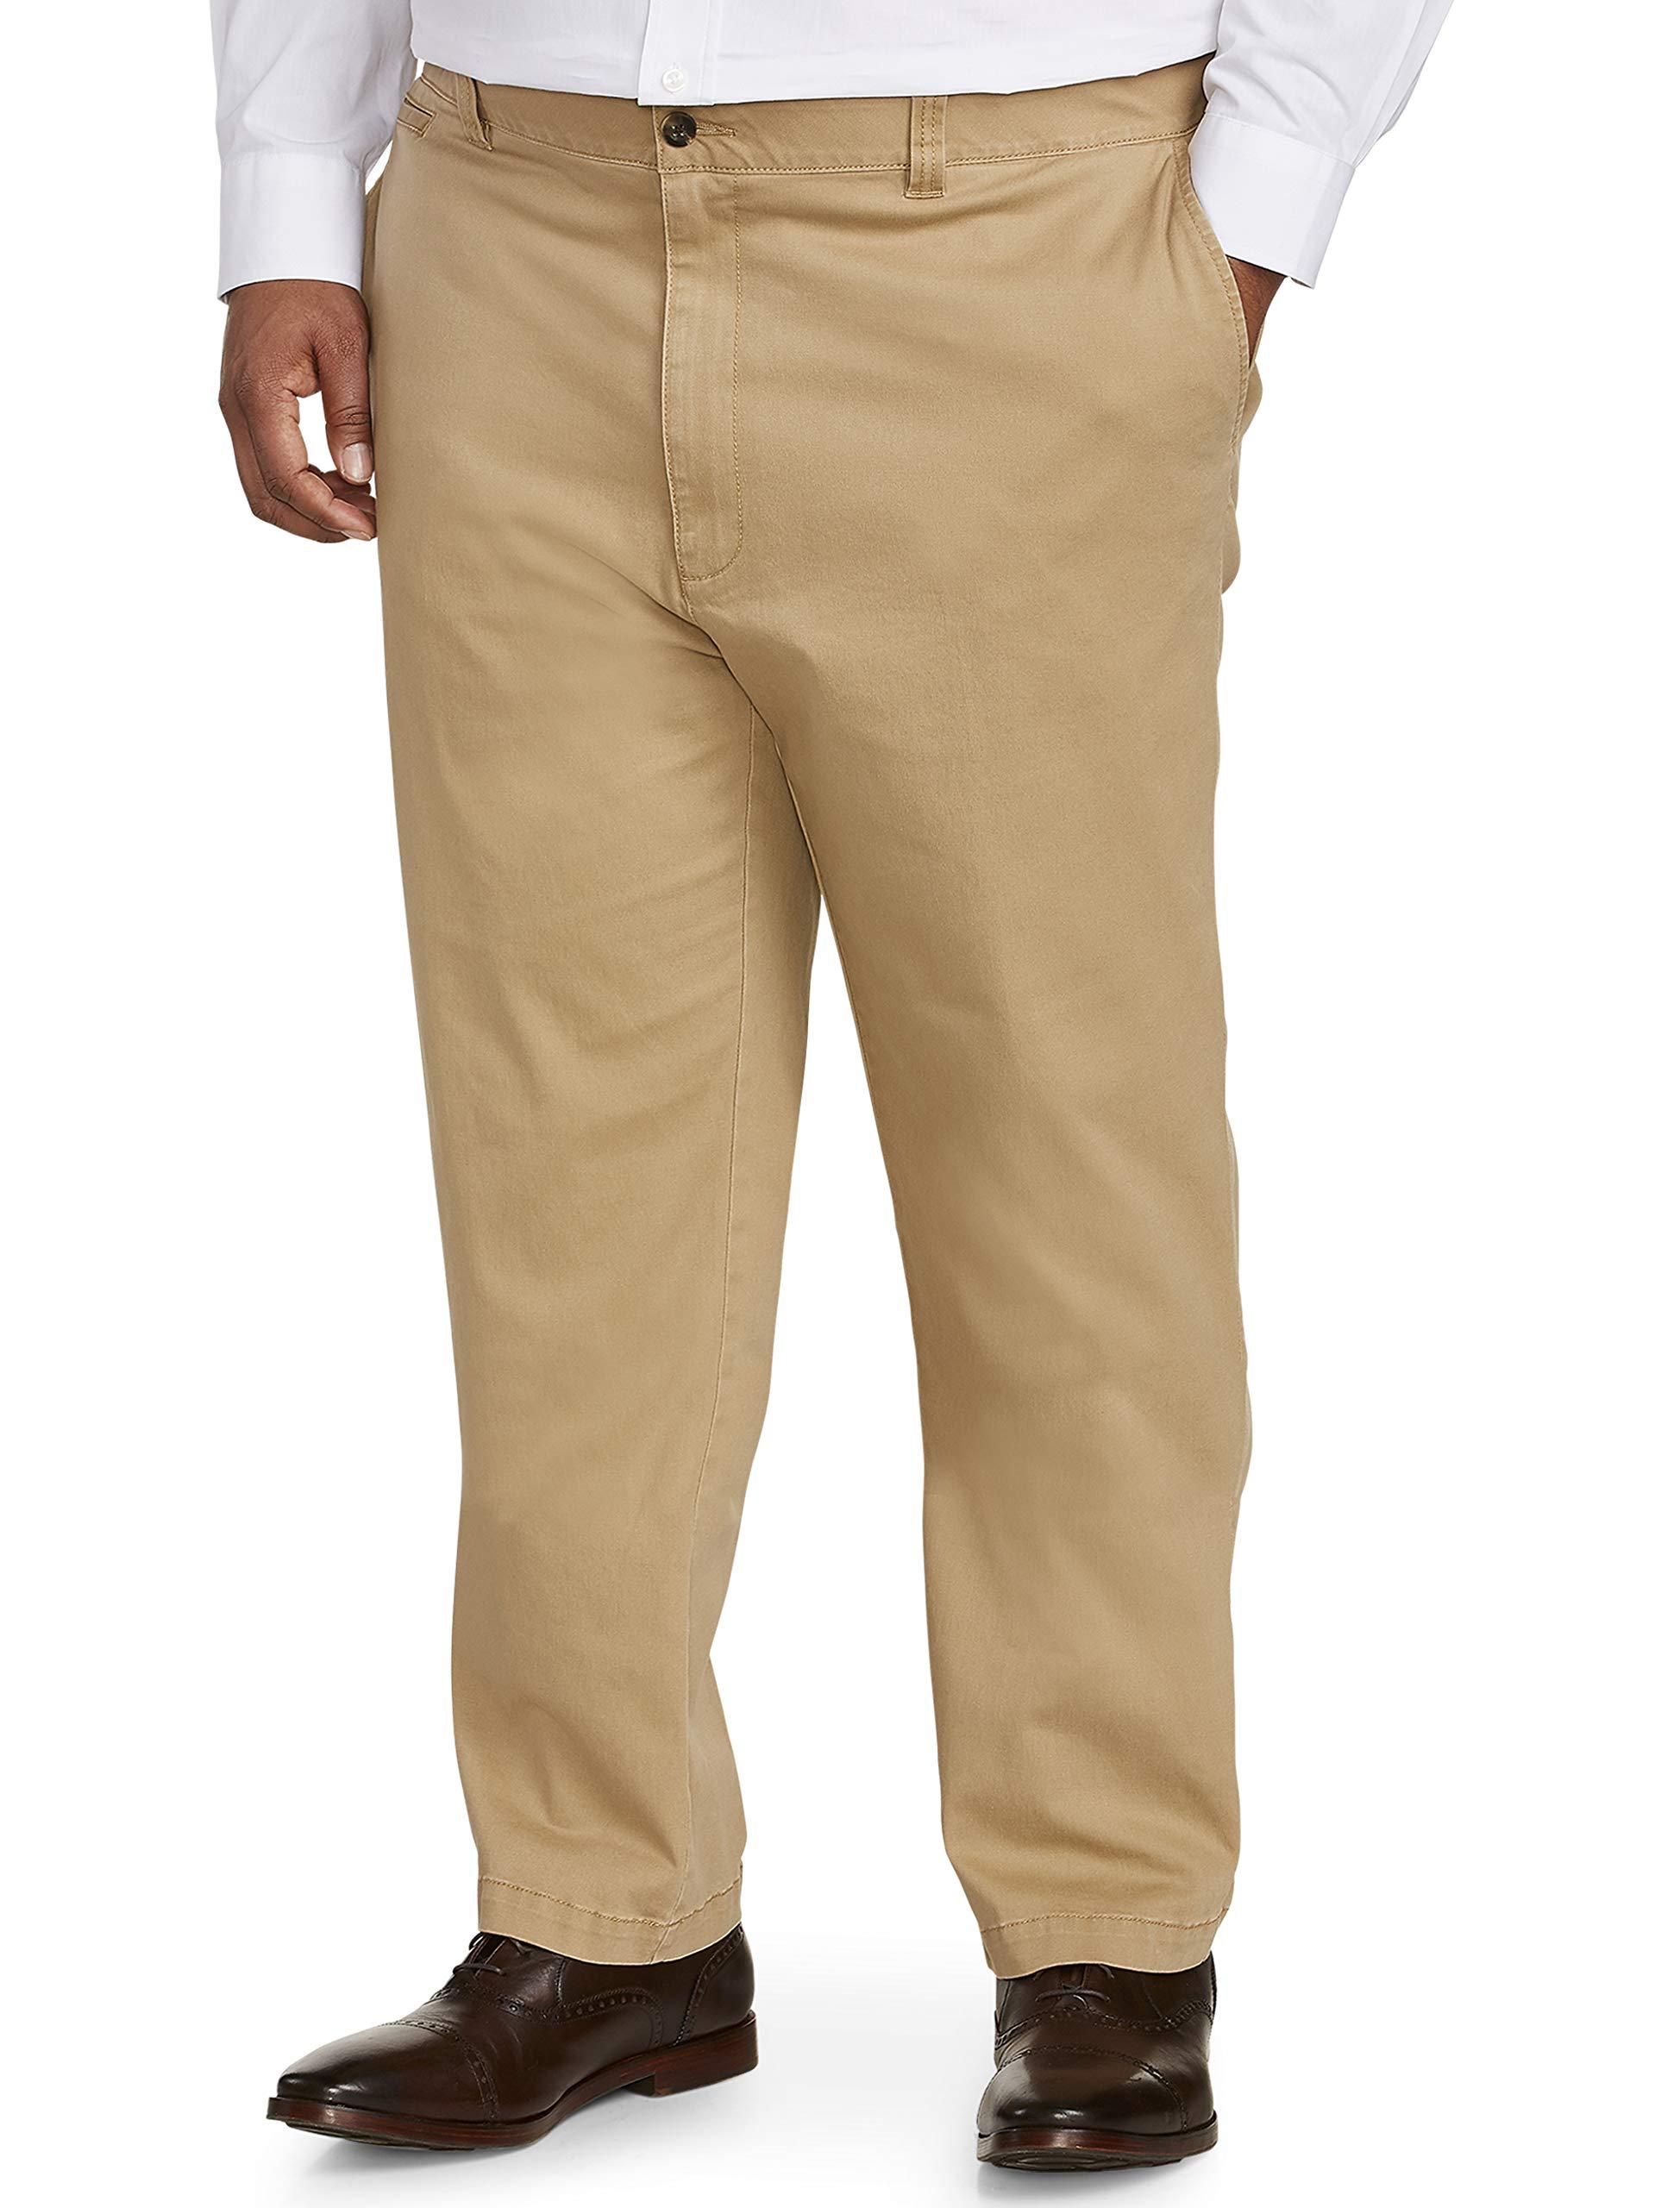 Essentials Mens Big /& Tall Athletic Casual Stretch Khaki Pant Fit by DXL